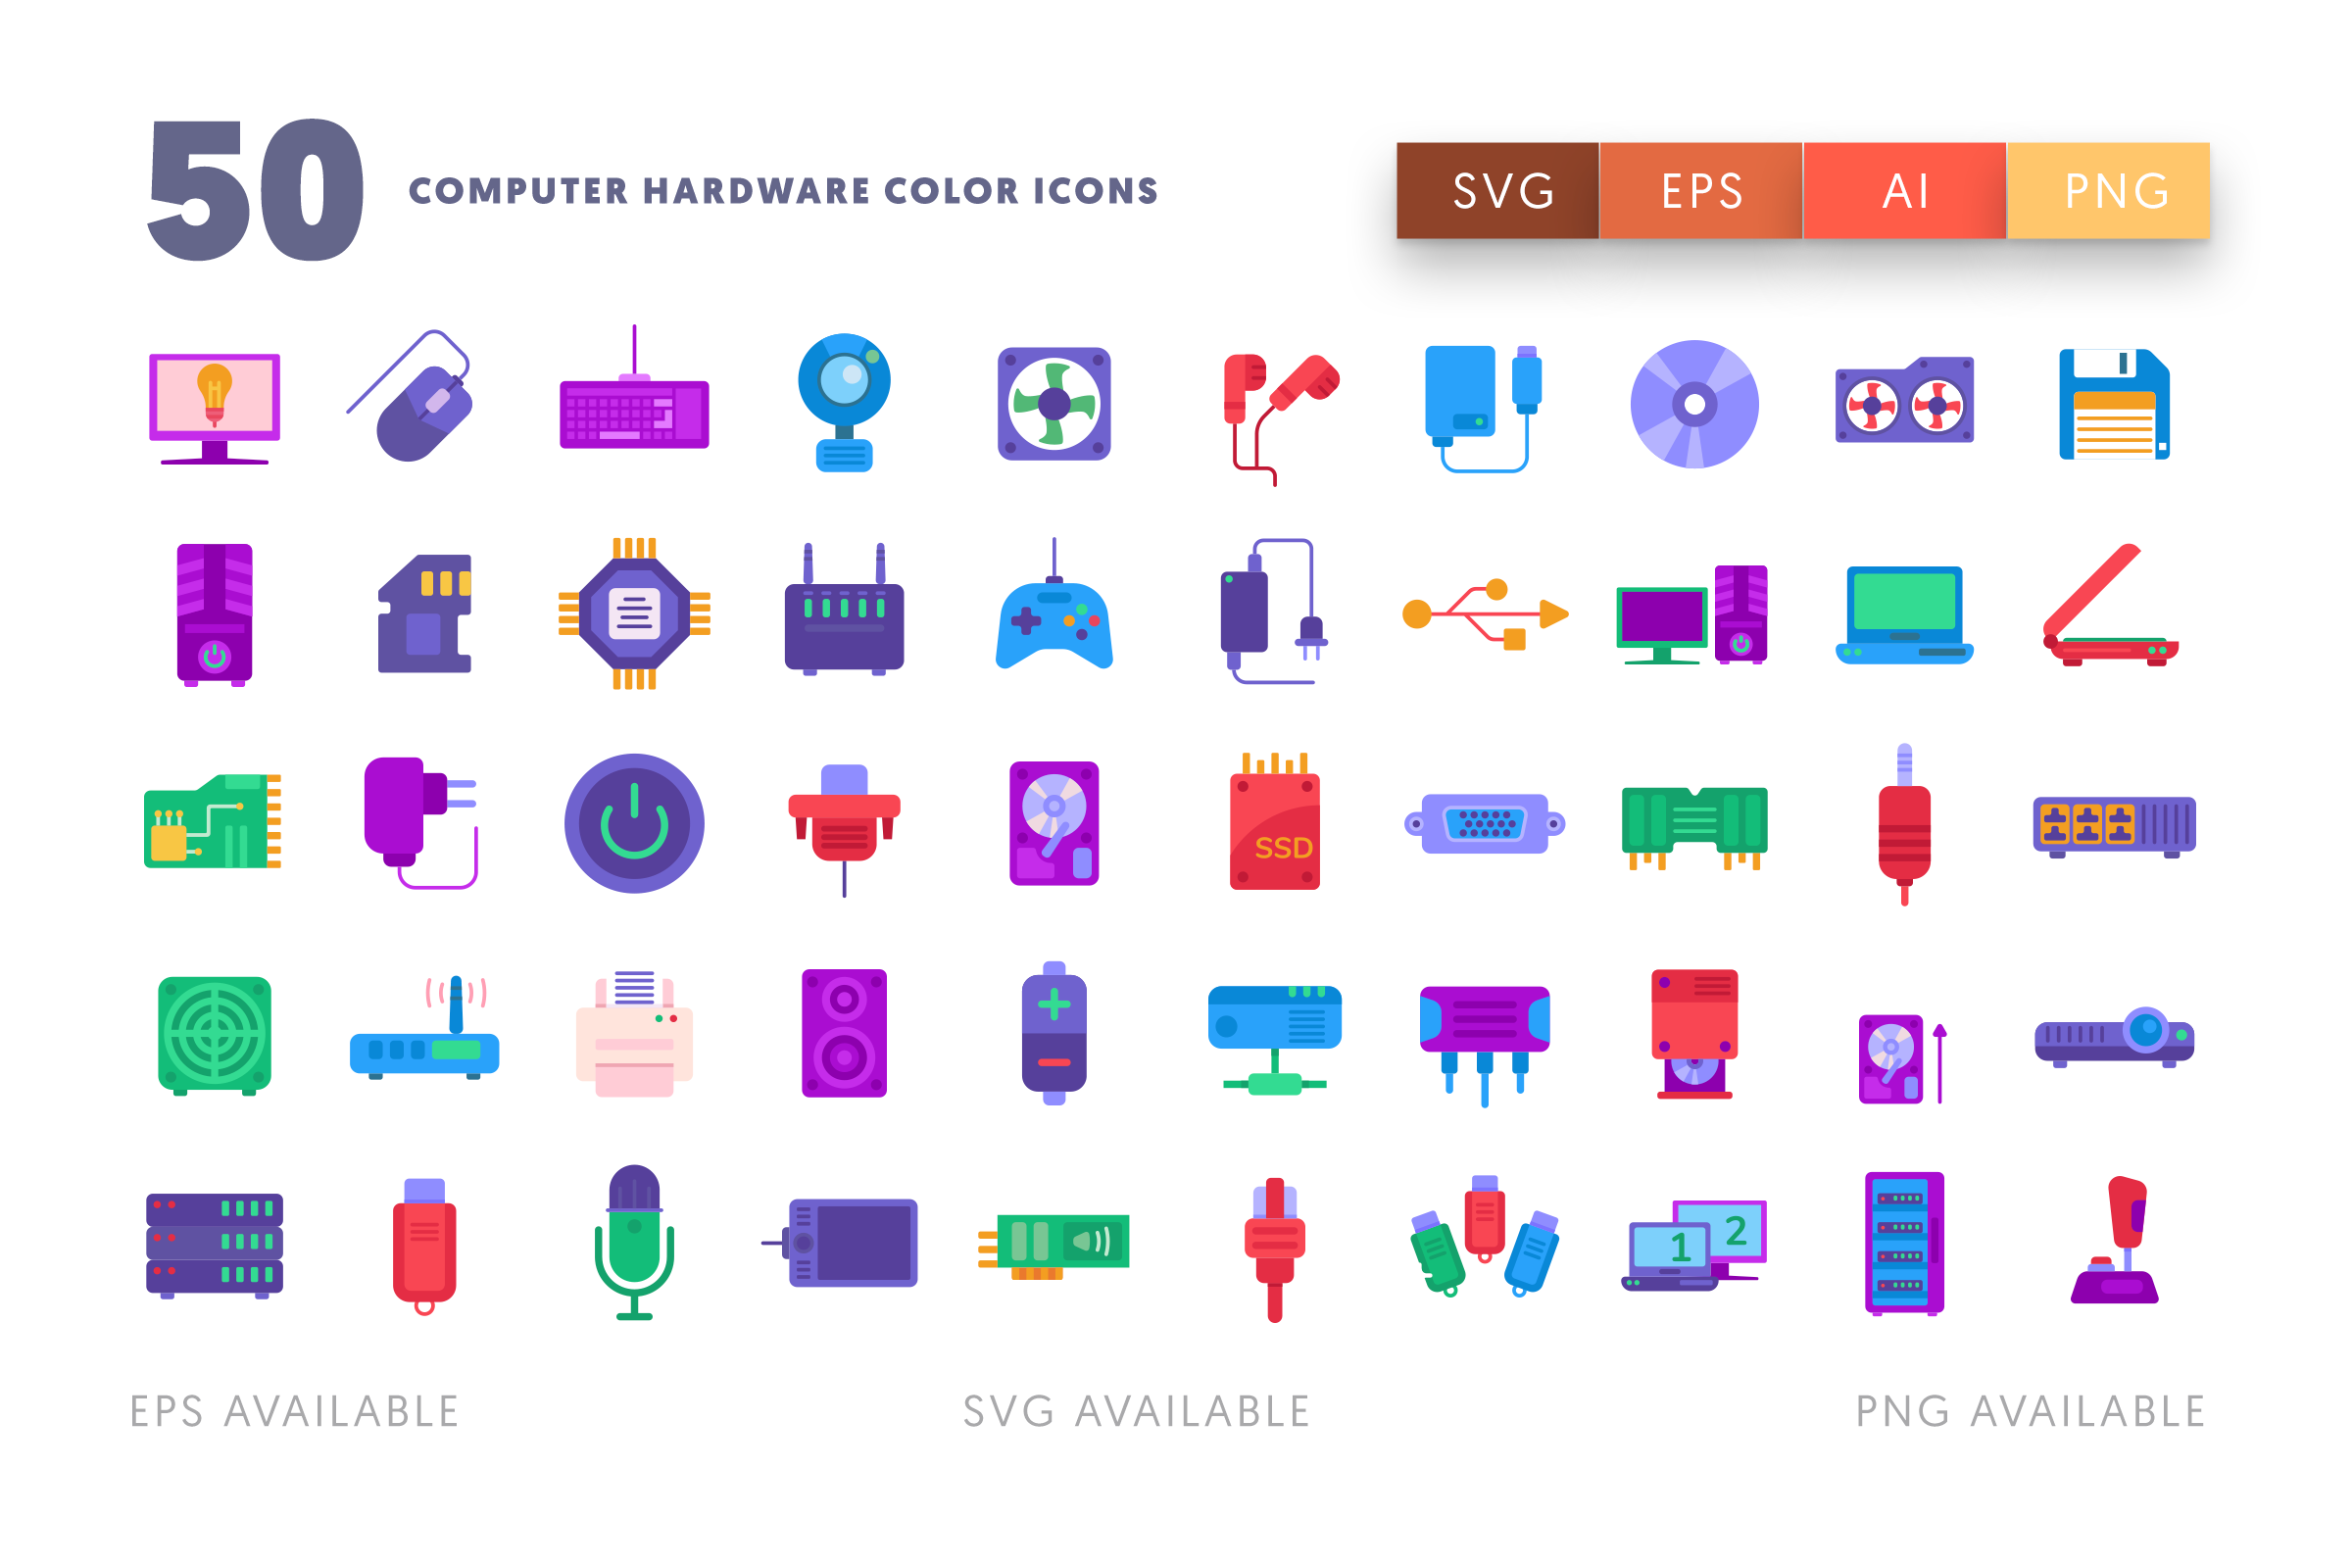 Computer Hardware Color icons png/svg/eps